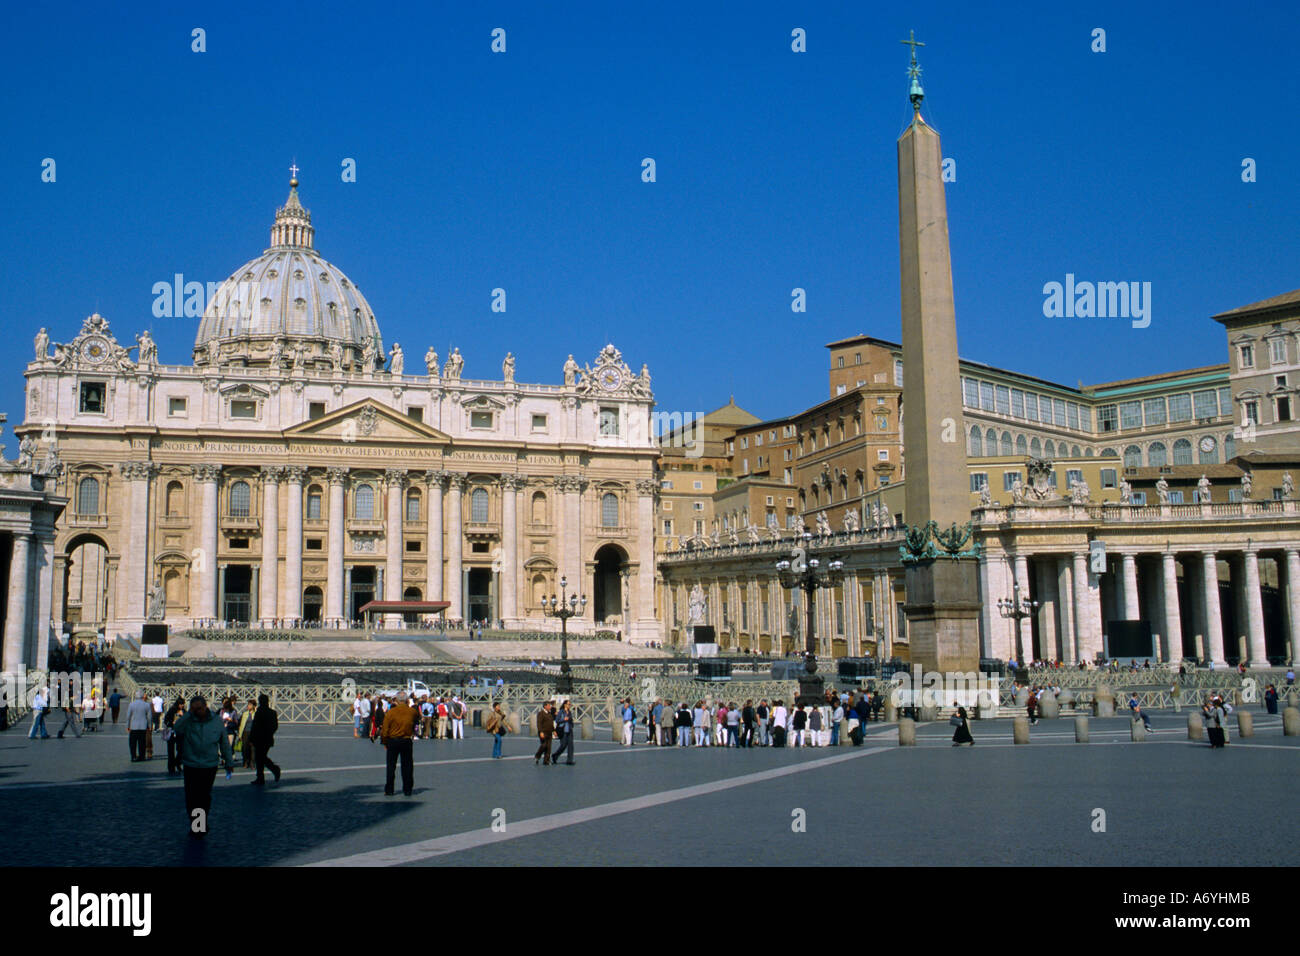 Italy Rome Vatican St Peter s Basilica Square Stock Photo